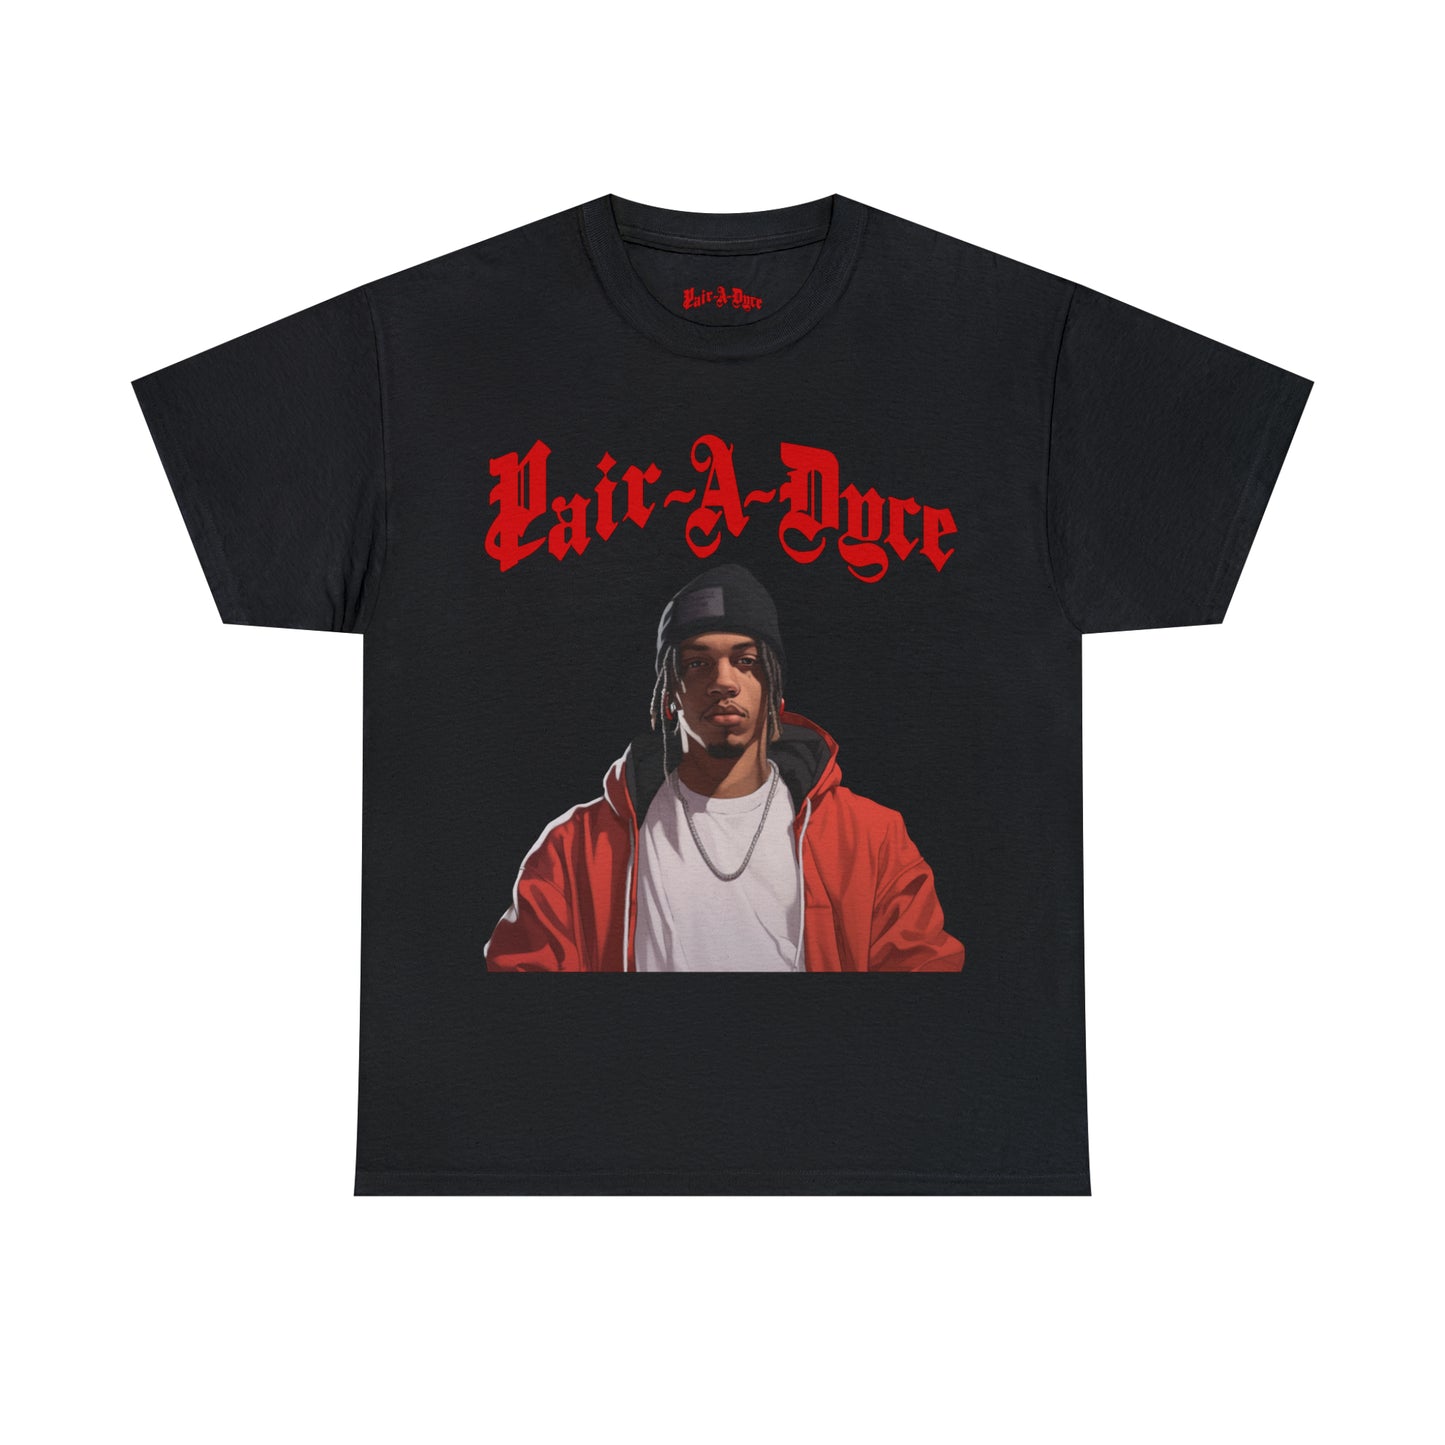 Pair-A-Dyce™ Red Fall Tee